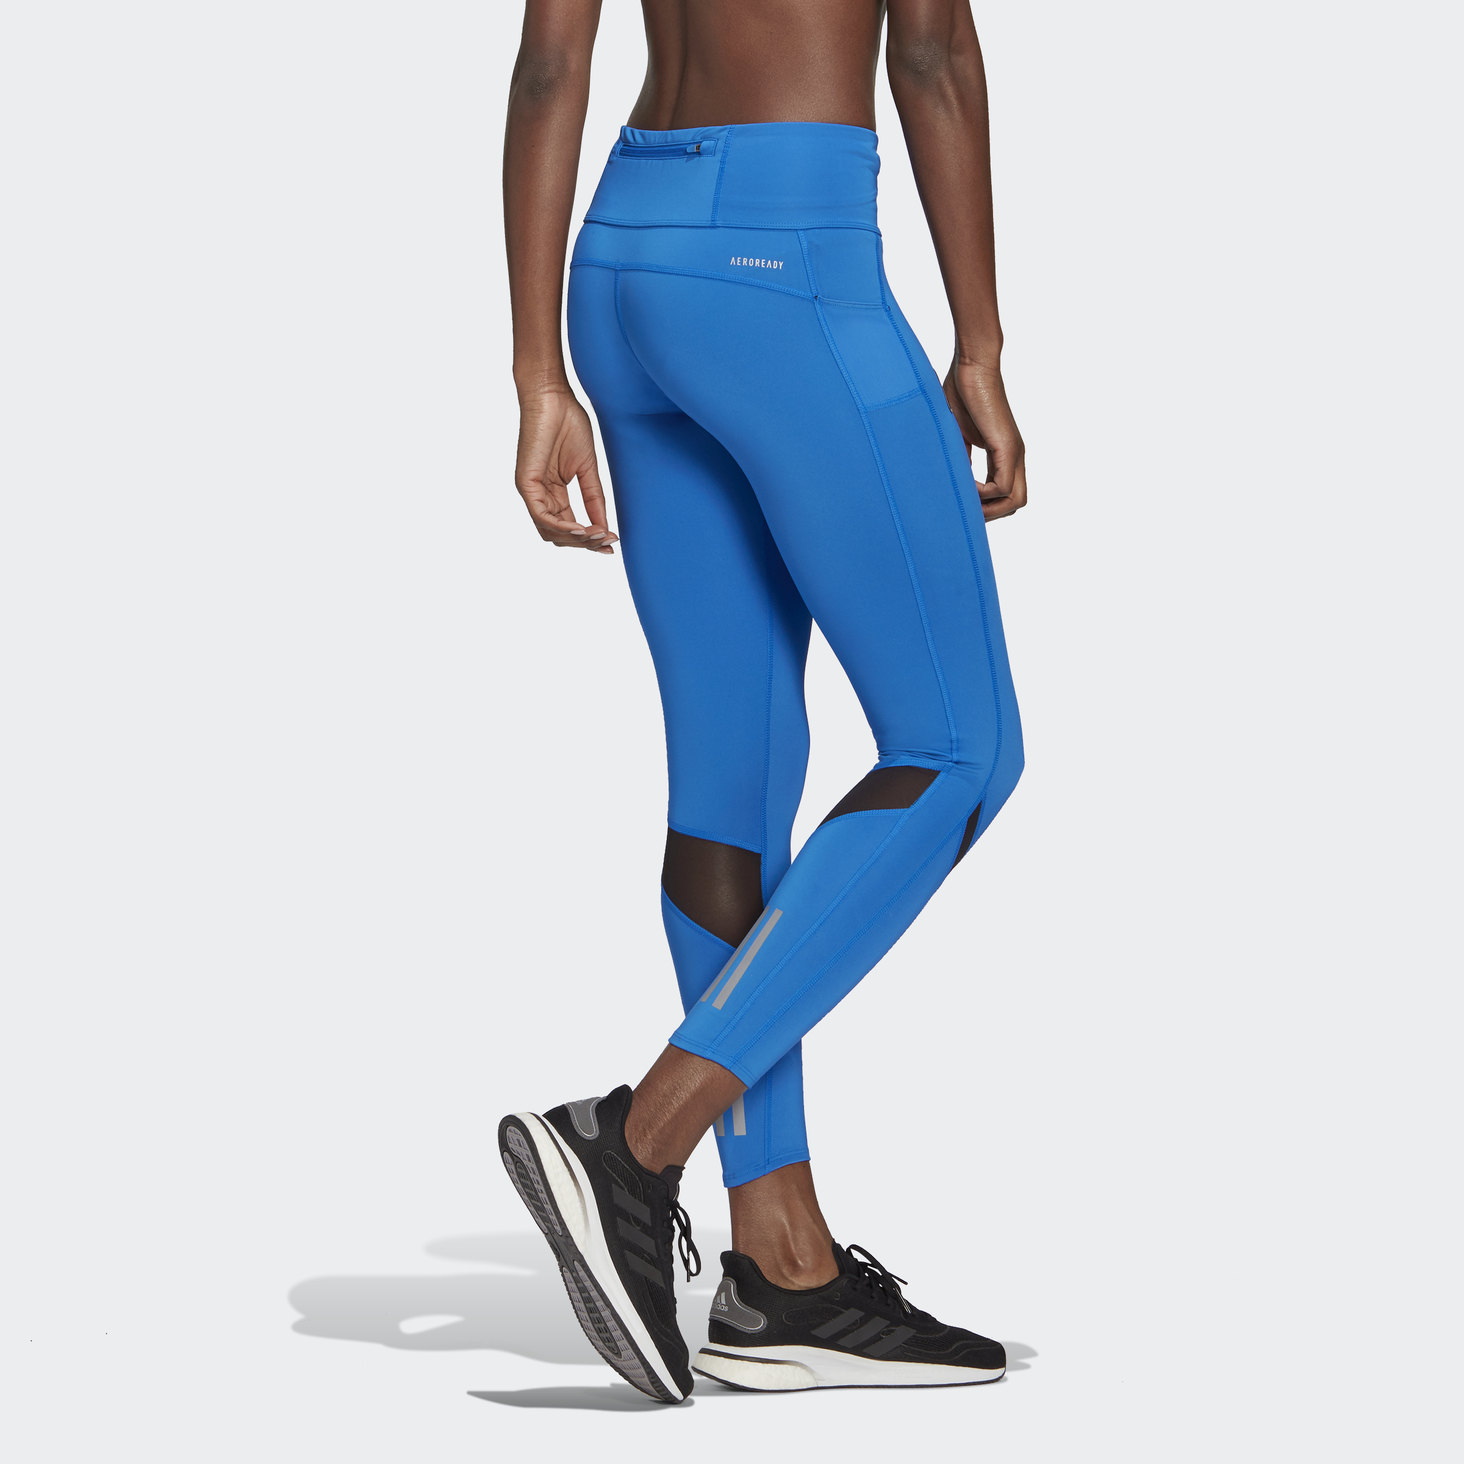 Agriculture Adidas | Society International 1099 Size of Precision Leggings